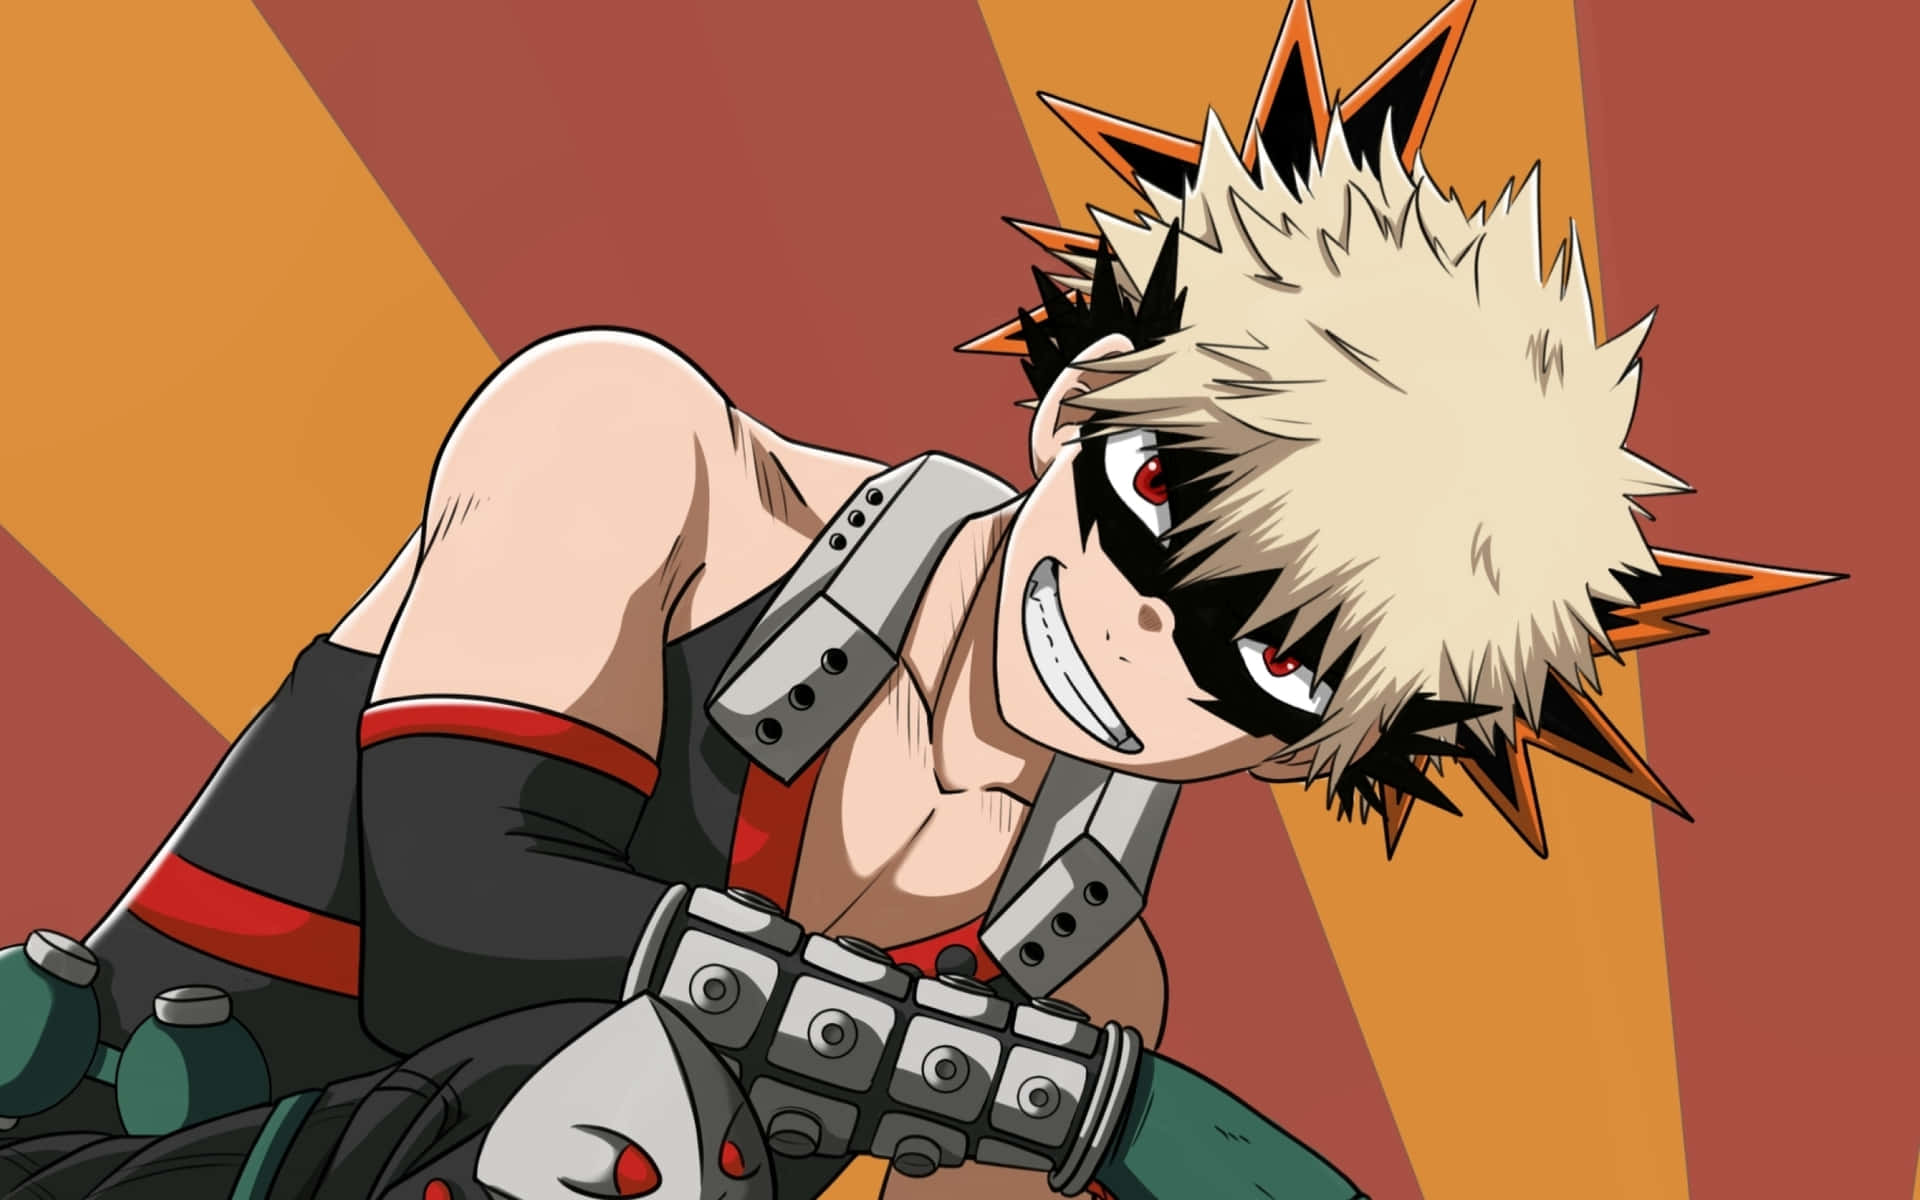 Katsuki Bakugou stands victorious against his opponents